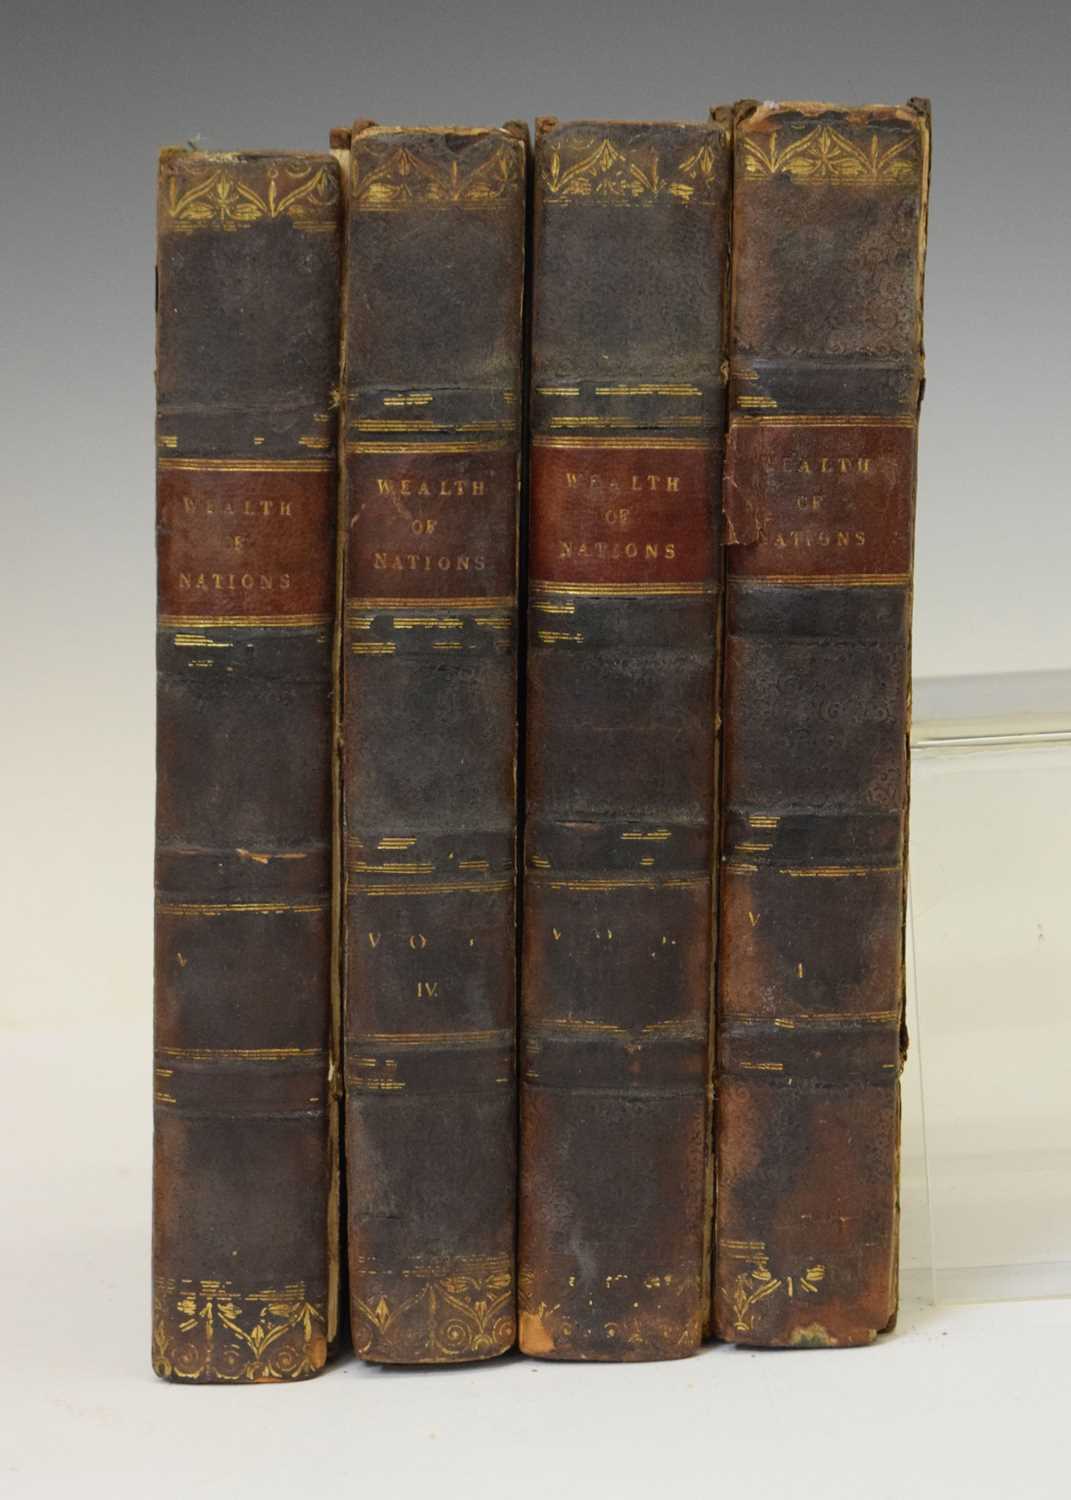 Early edition of The Wealth of Nations, Adam Smith